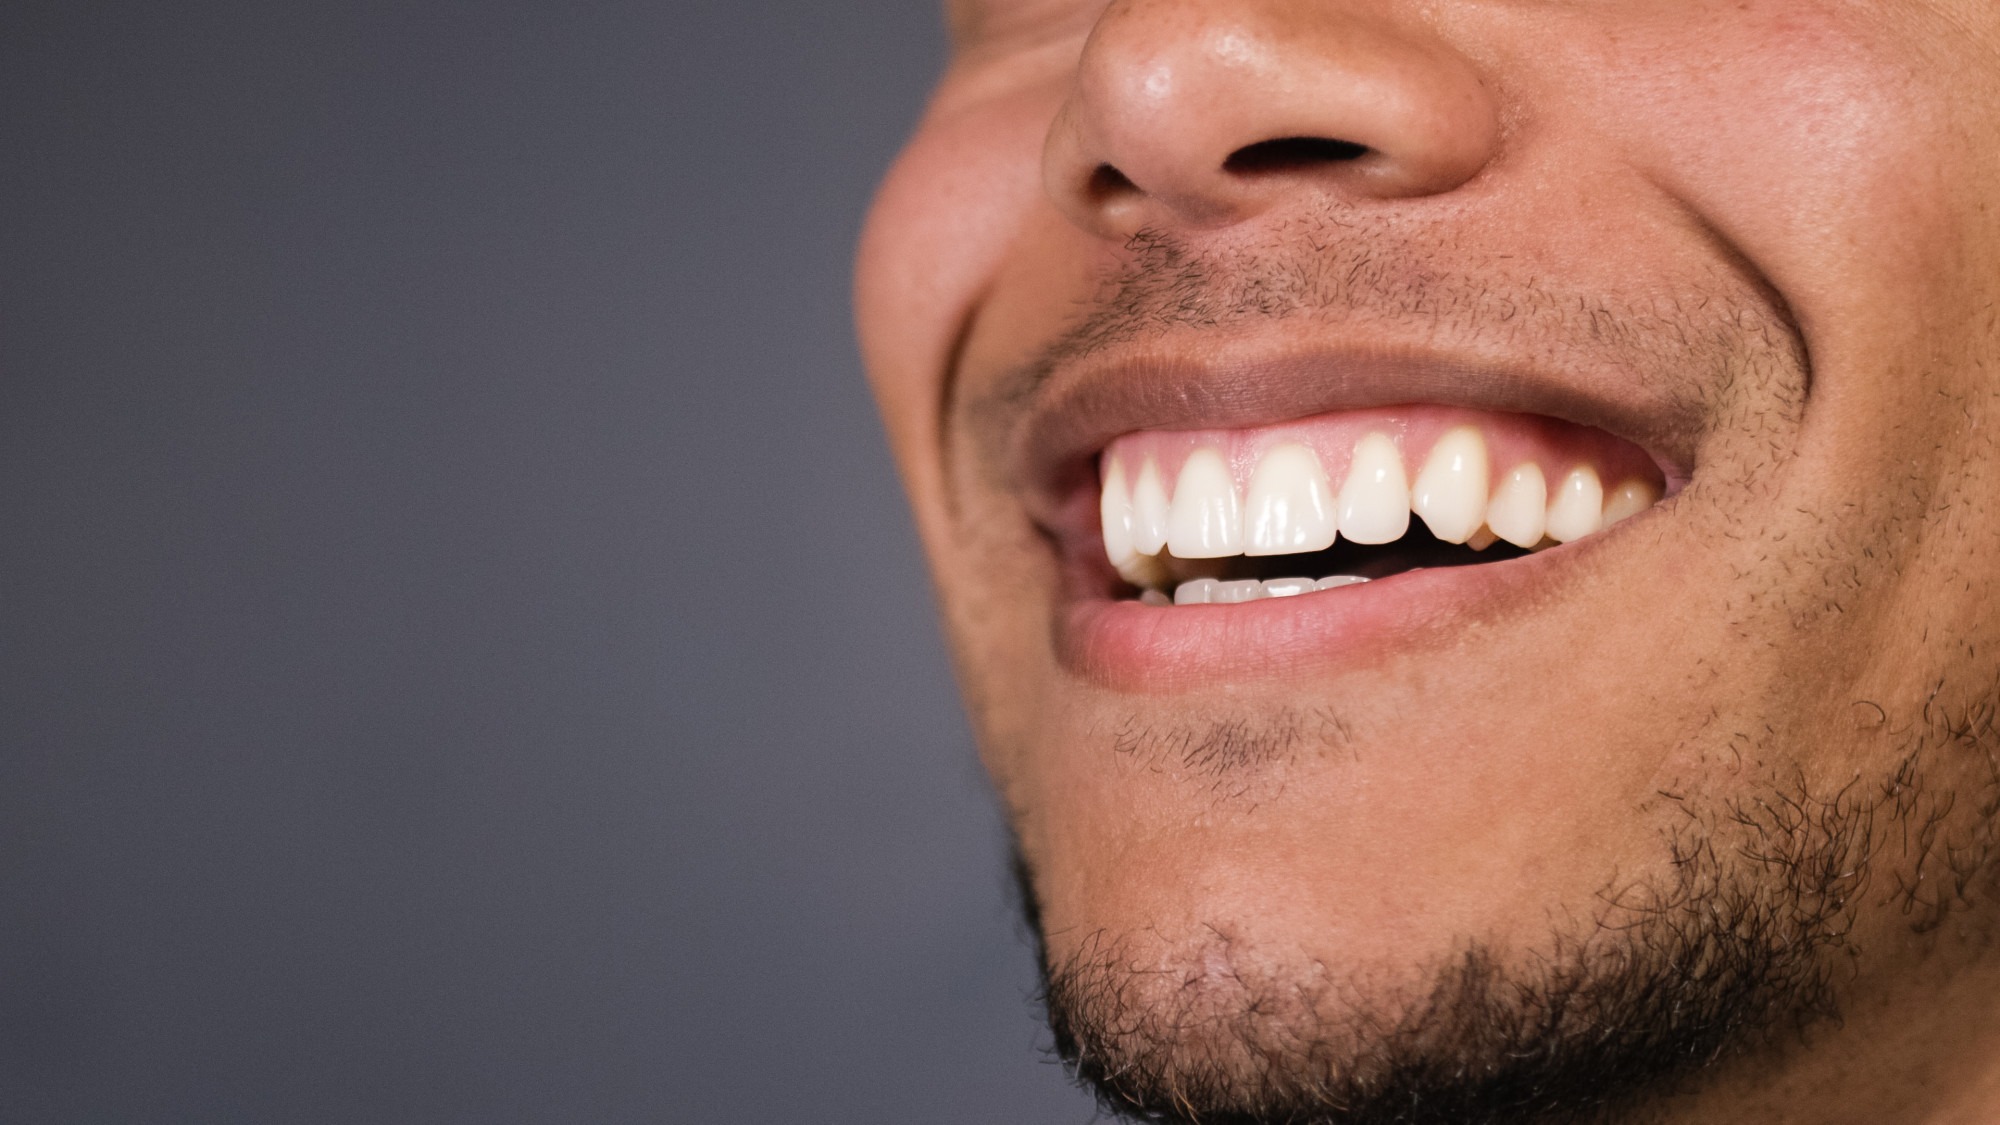 New Smile, Who This? What's Possible With Cosmetic Dentistry Near